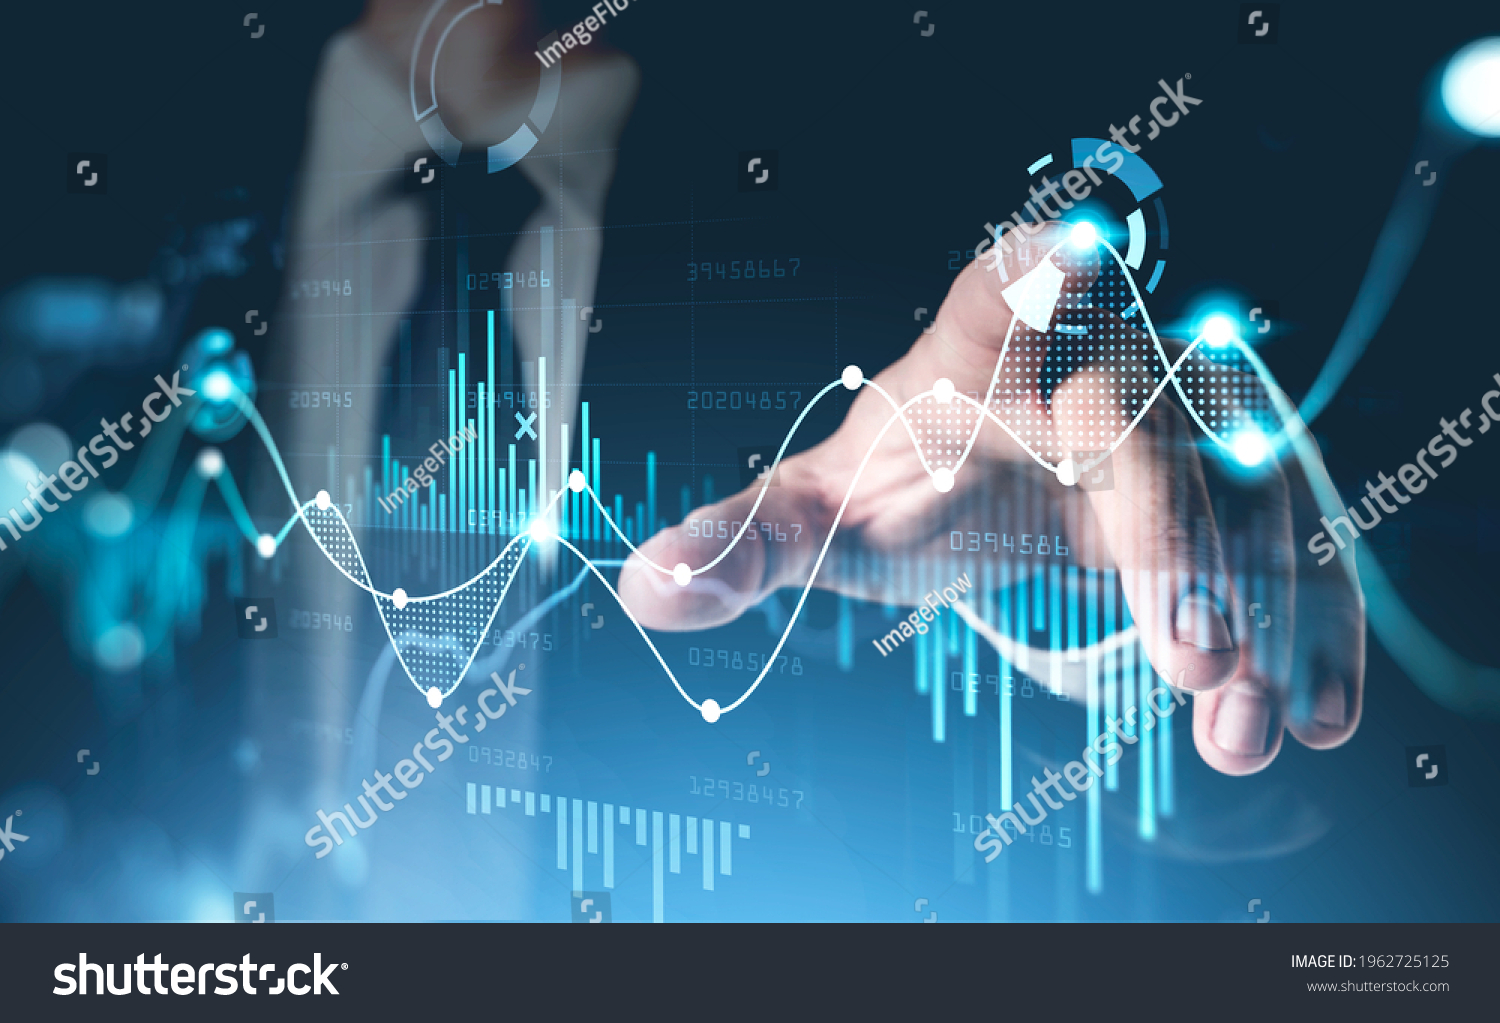 Office man finger touch hud, virtual screen with stock market changes, business candlesticks graph chart. Double exposure of blue and white lines, growing numbers, online trading #1962725125